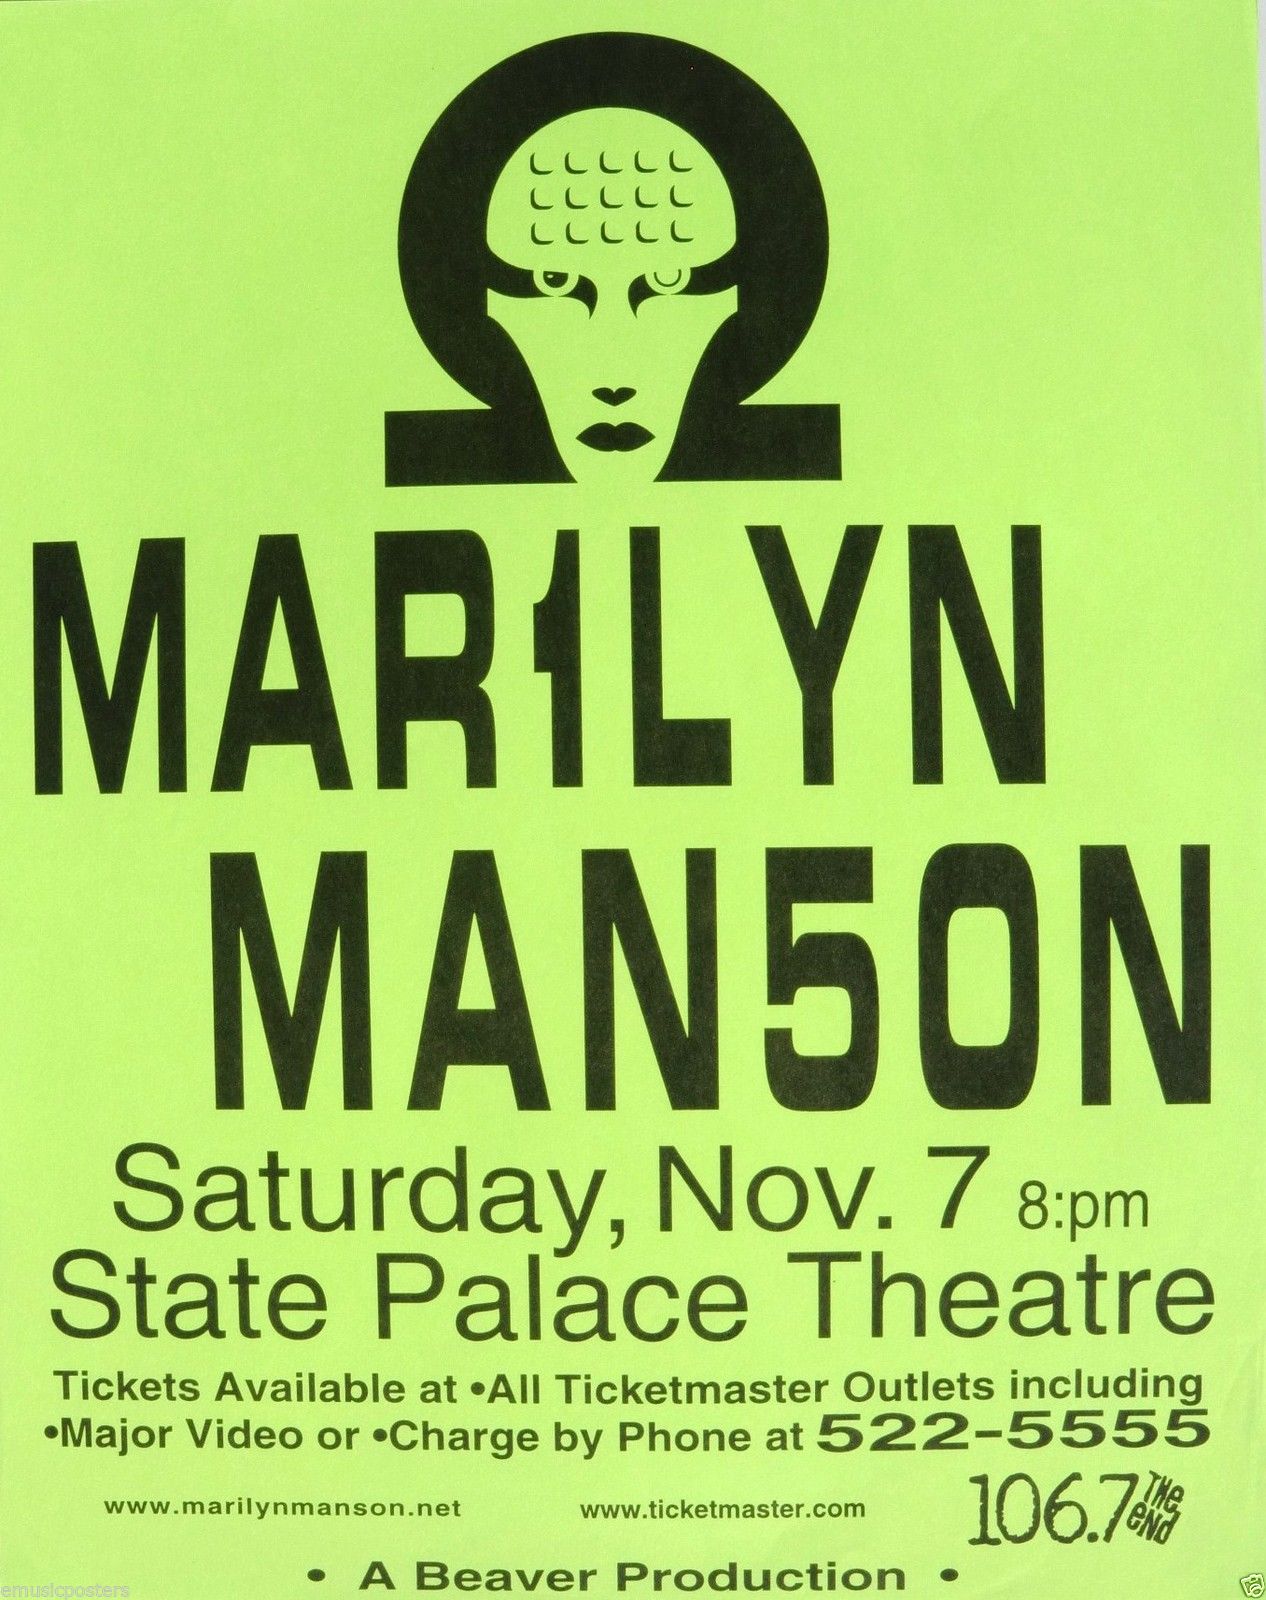 November 7, 1998 performance at State Palace Theatre in New Orleans, Louisiana, USA.